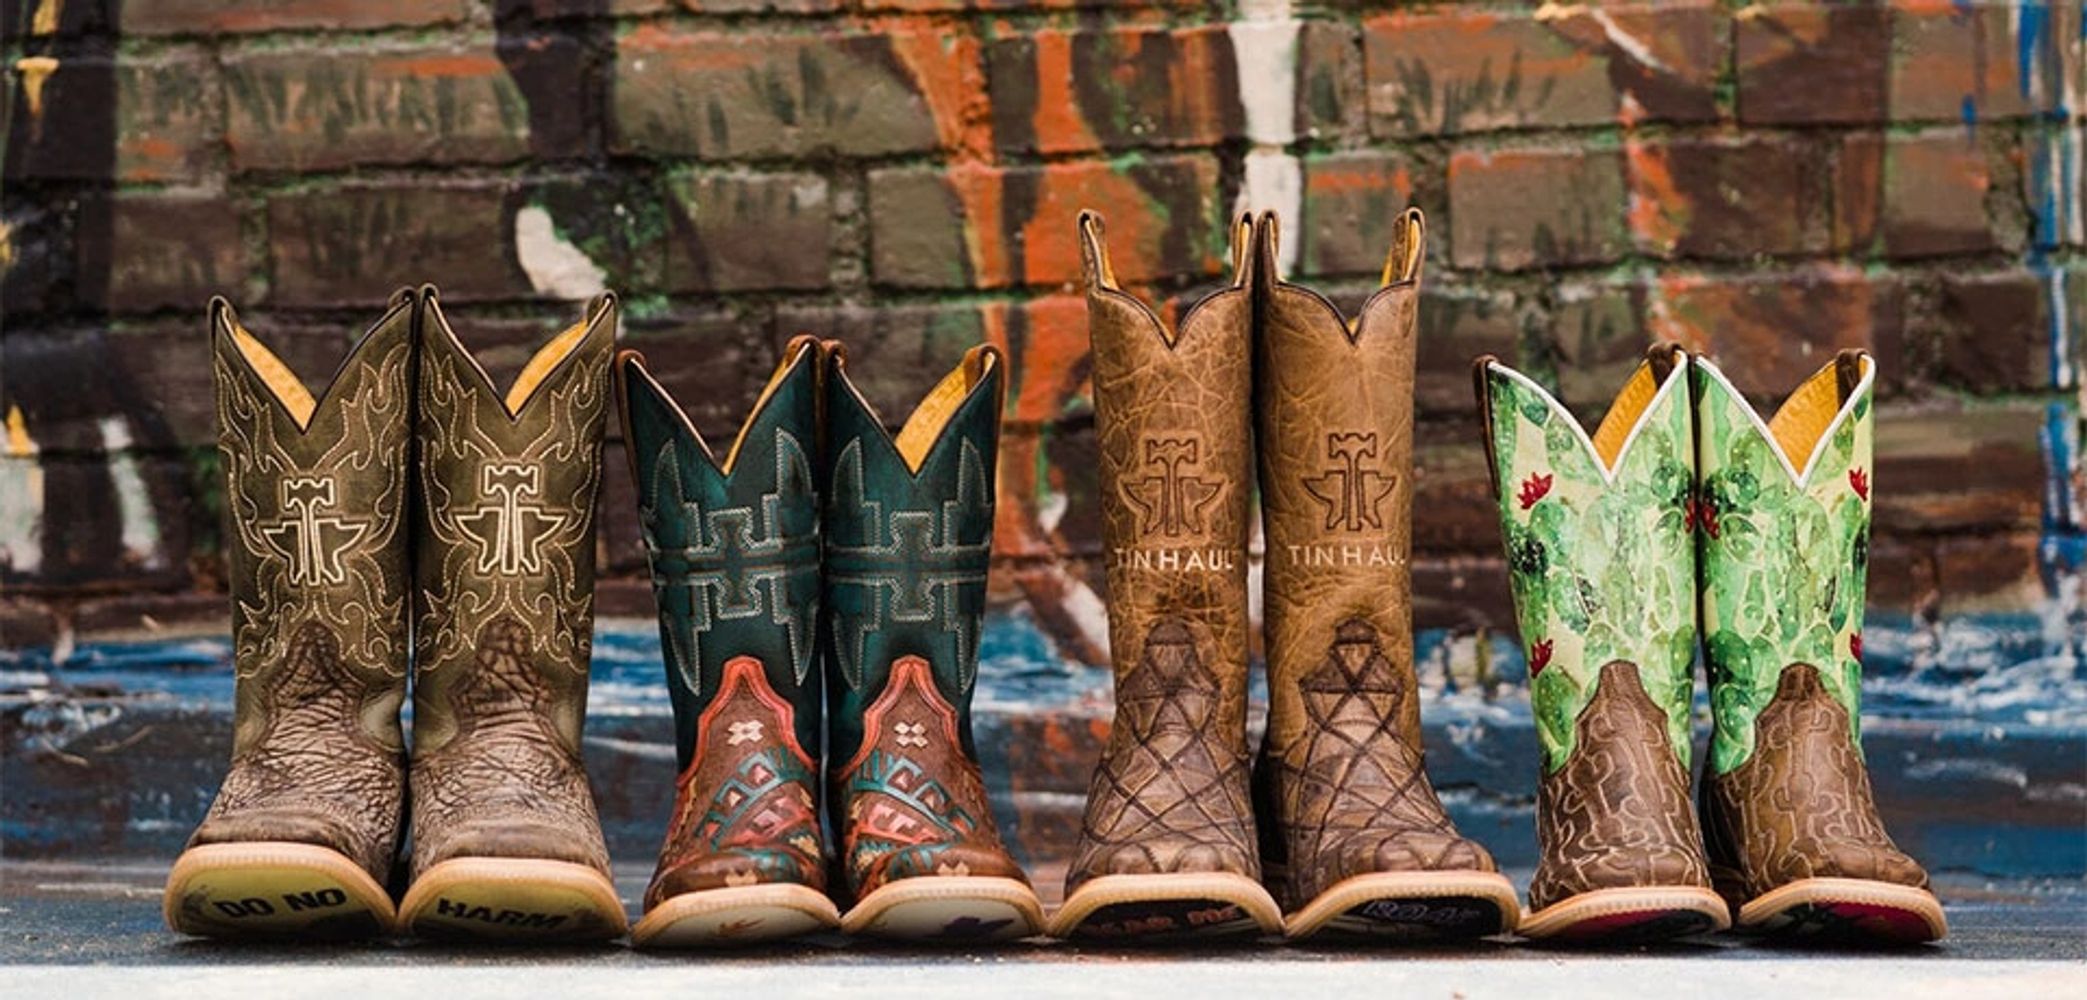 TheBootSpot - Western Wear, Boutique, Boots, Candles, Signs